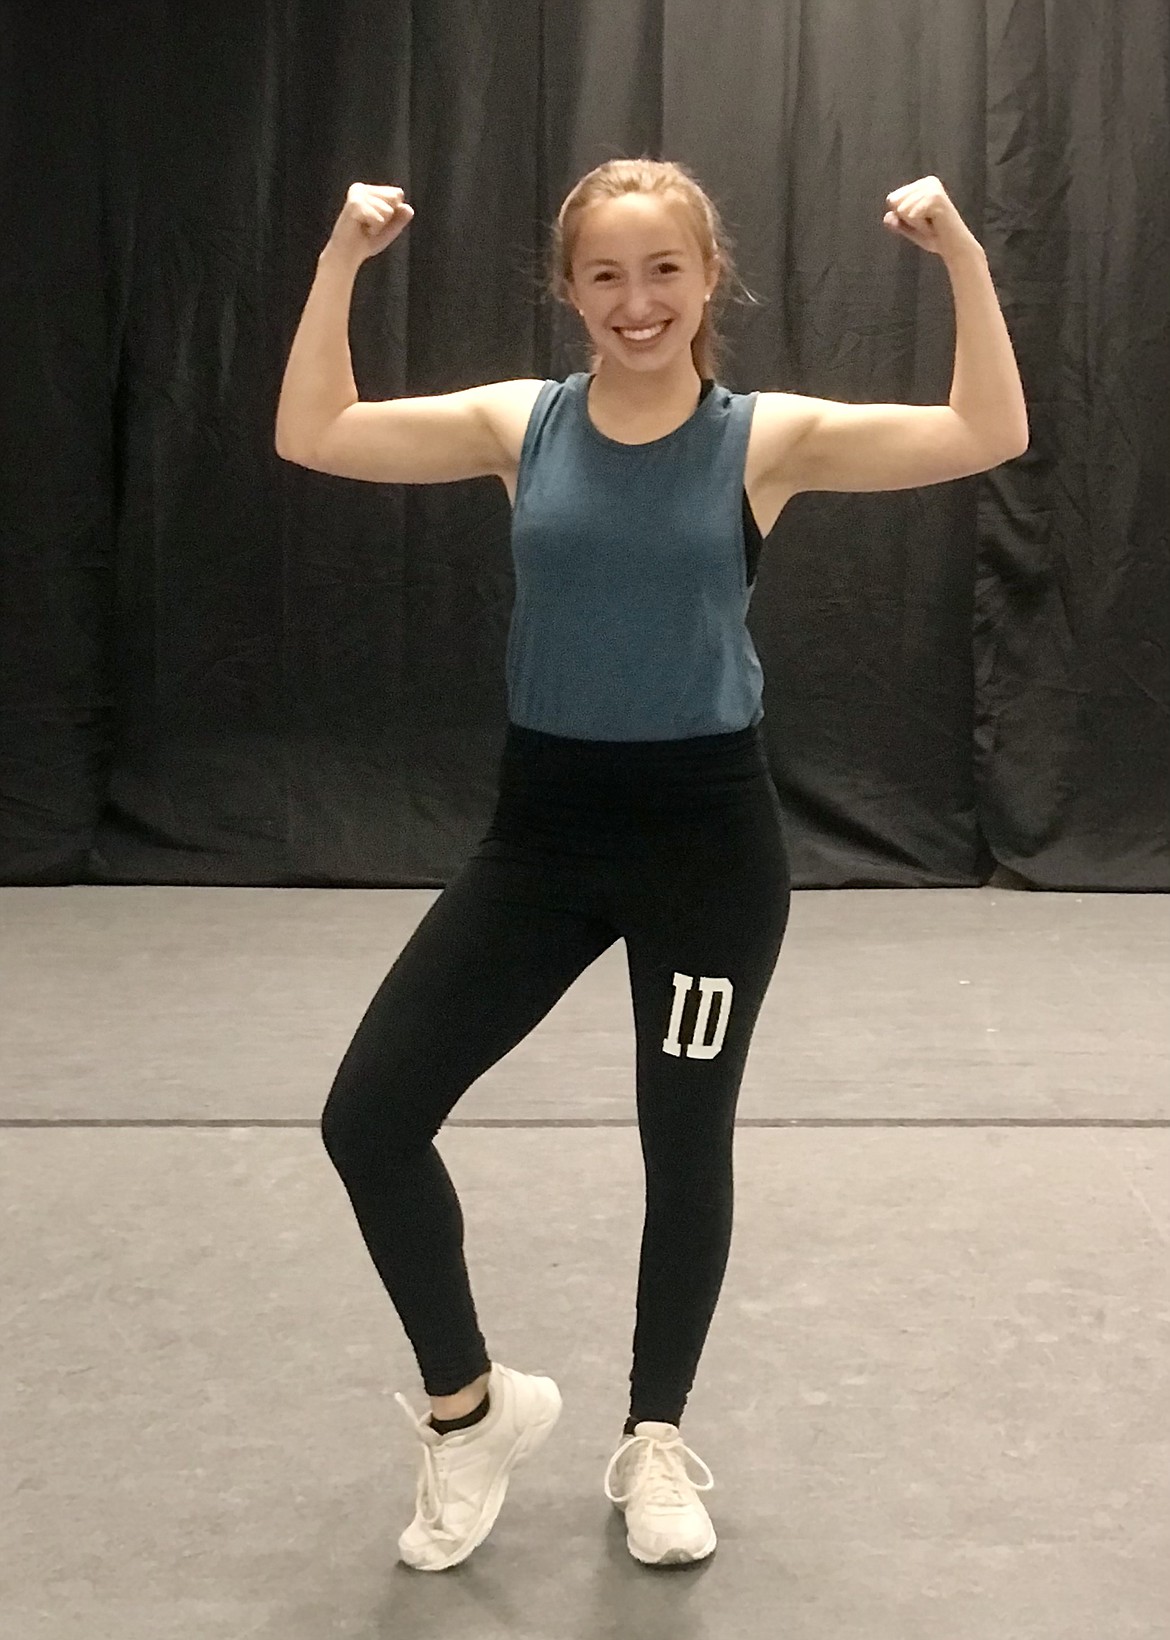 Camille Neuder, Distinguished Young Woman of Idaho, takes part in a fitness routine. She will be taking part in the DYW National Finals later this month.